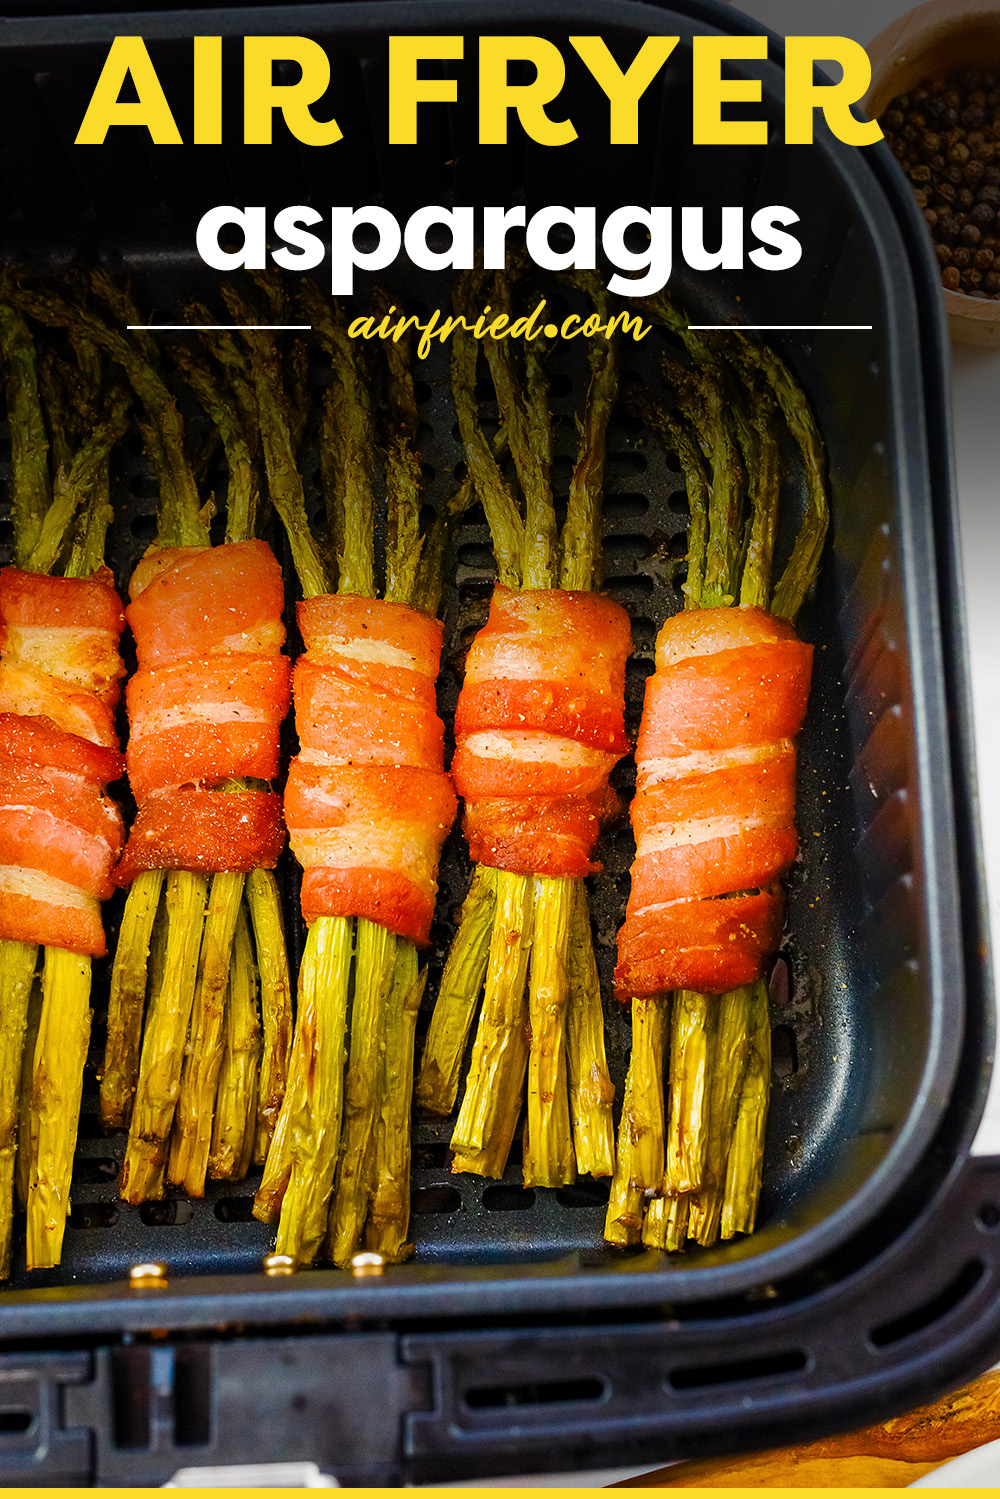 Bacon wrapped asparagus lined up in an air fryer basket.